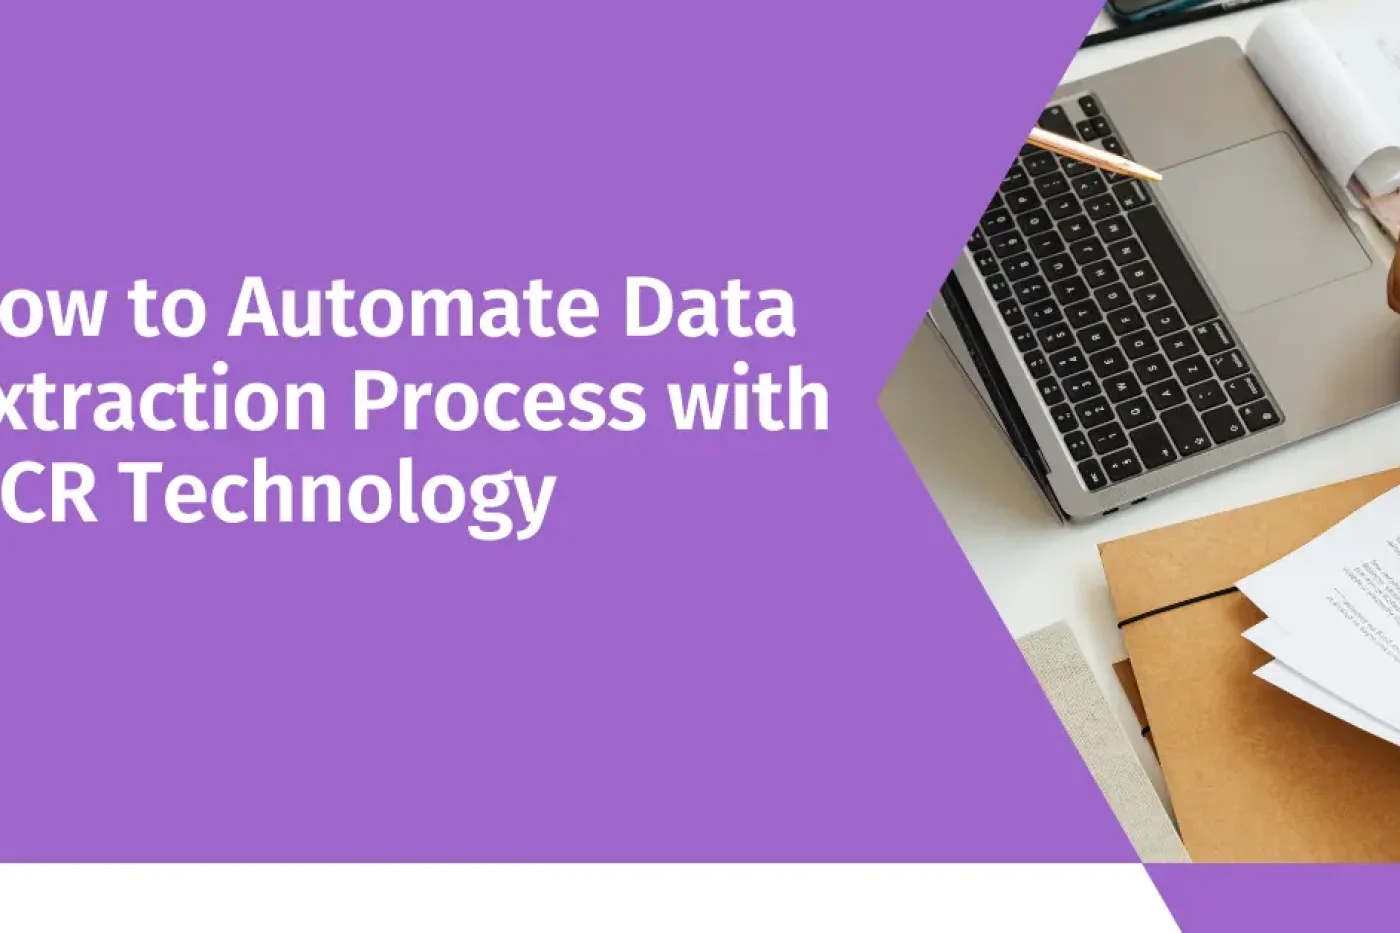 How to Automate Data Extraction Process with OCR Technology